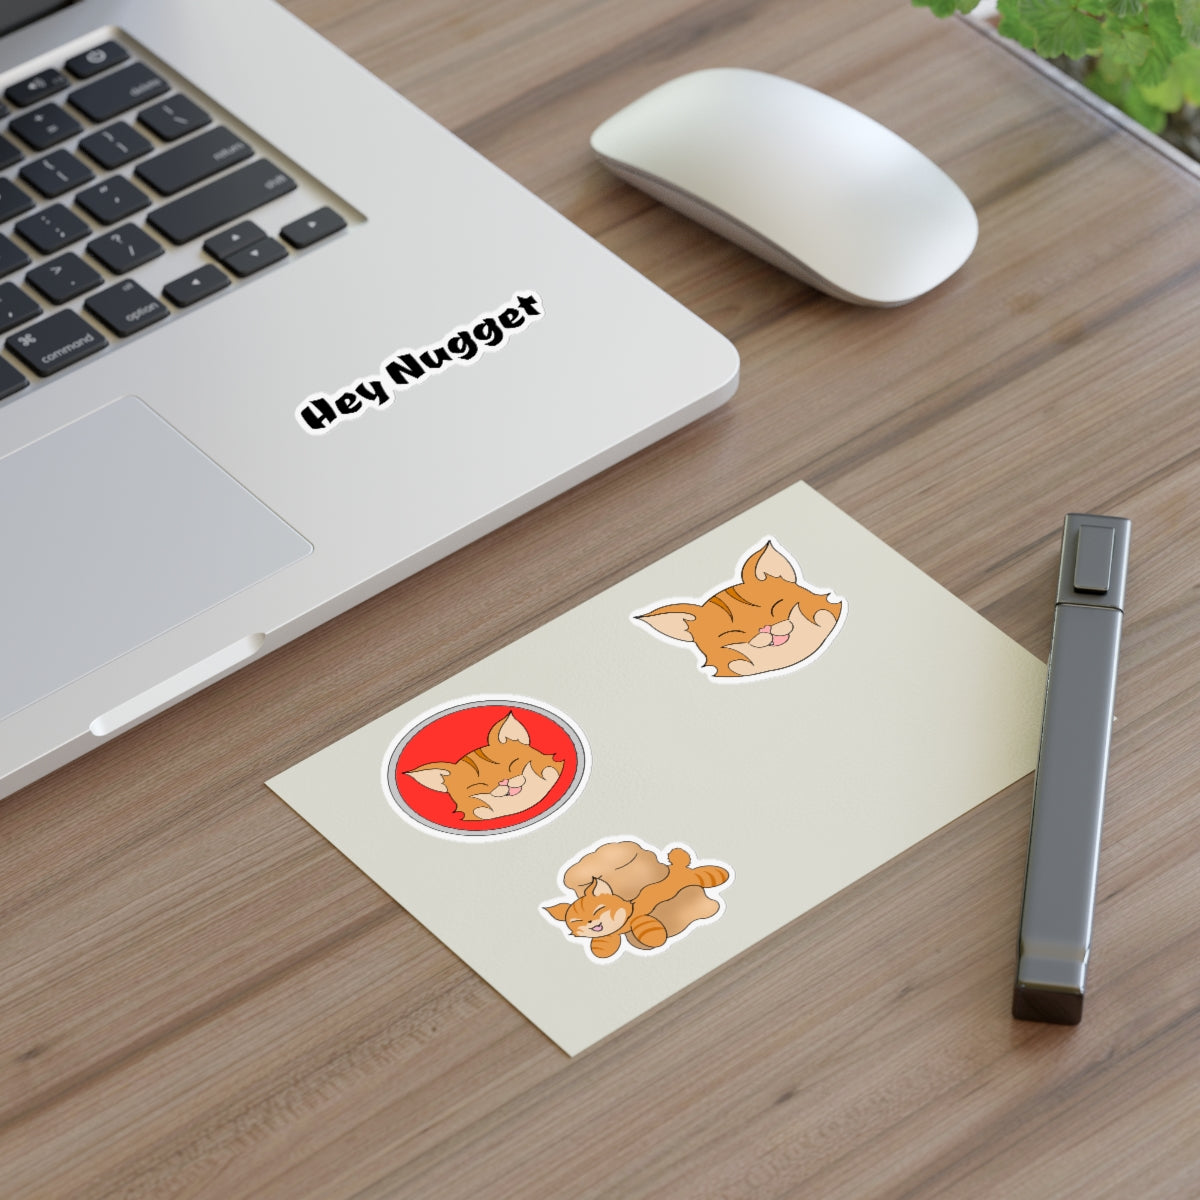 Stand out  with the  Sticker Sheets  available at Hey Nugget. Grab yours today!